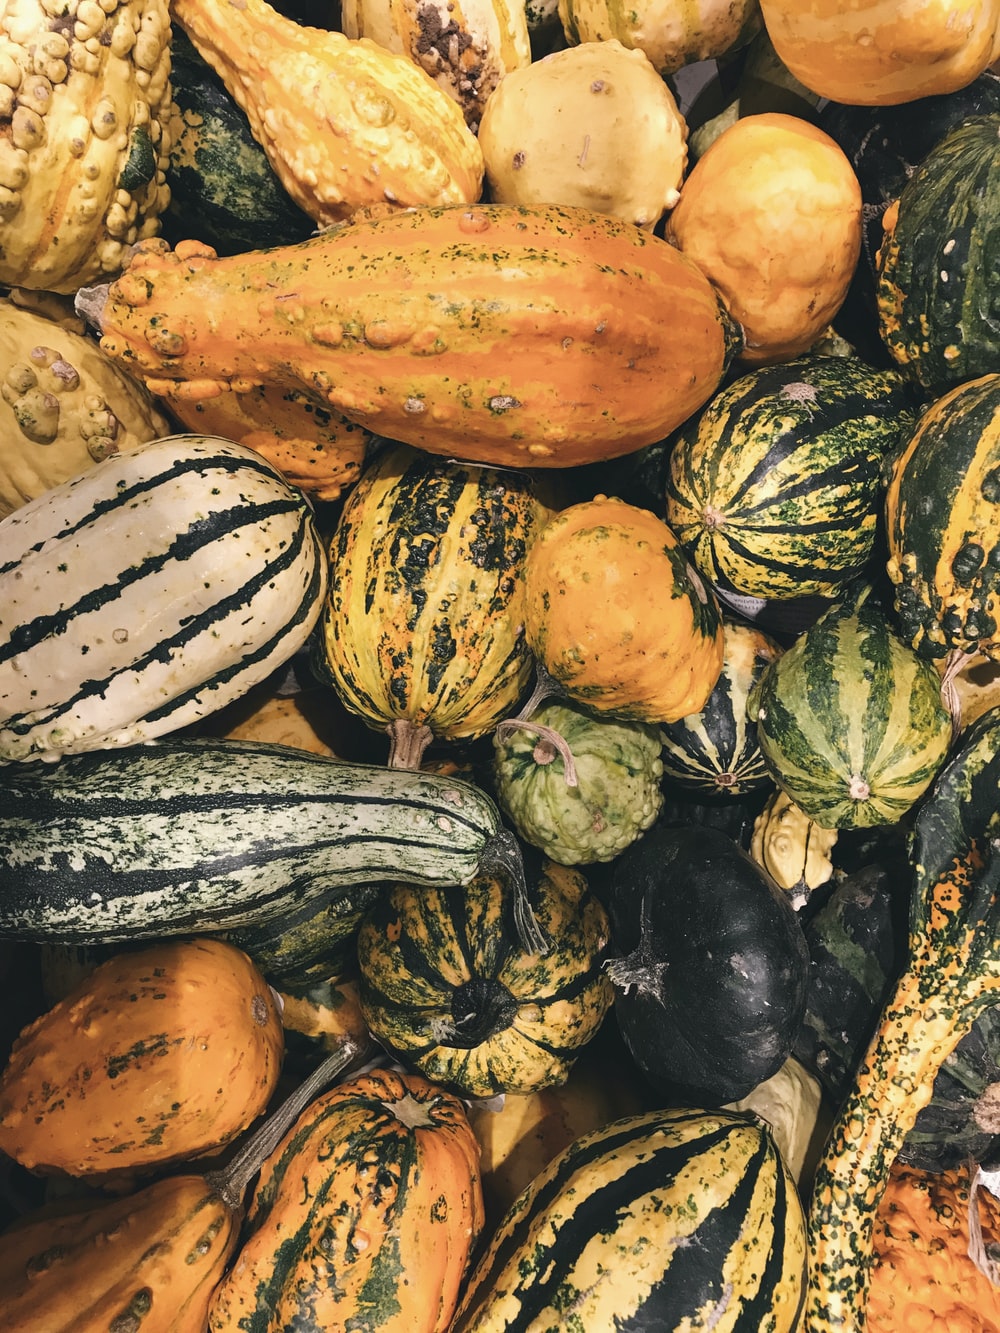 Squash Picture. Download Free Image